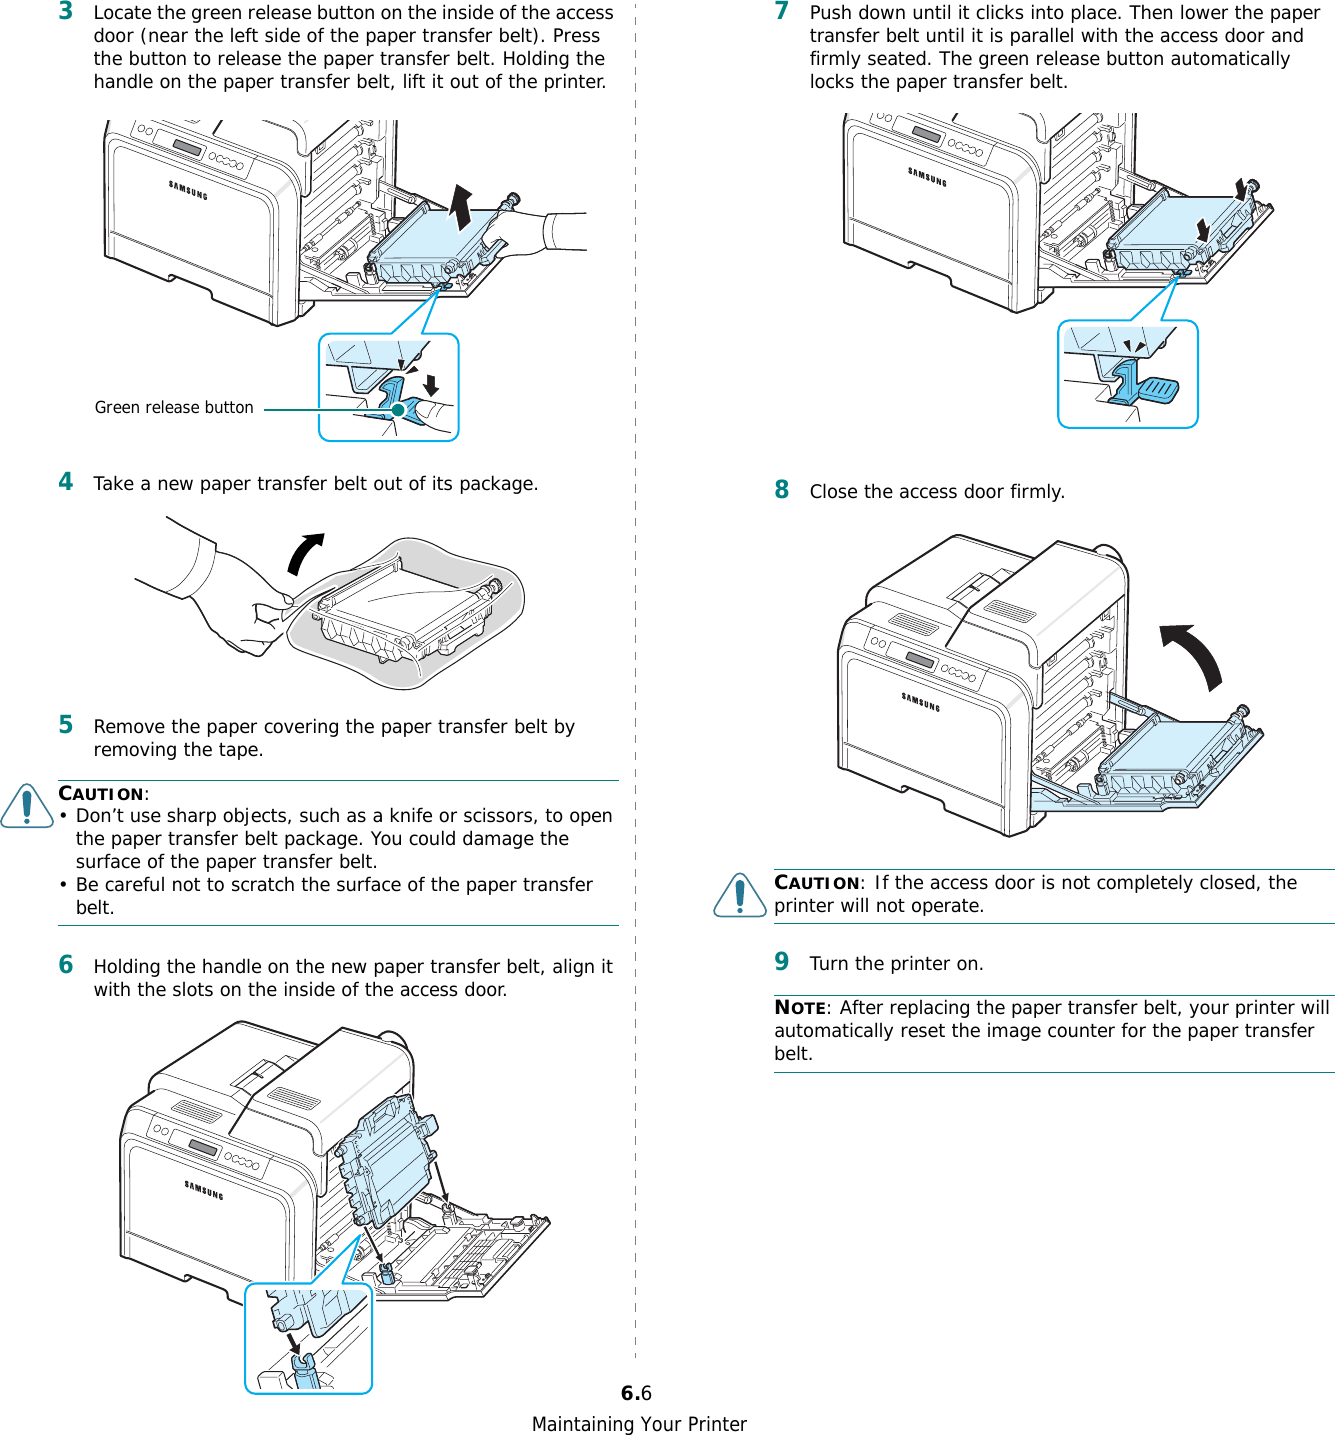 Maintaining Your Printer6.63Locate the green release button on the inside of the access door (near the left side of the paper transfer belt). Press the button to release the paper transfer belt. Holding the handle on the paper transfer belt, lift it out of the printer.4Take a new paper transfer belt out of its package. 5Remove the paper covering the paper transfer belt by removing the tape.CAUTION: • Don’t use sharp objects, such as a knife or scissors, to open the paper transfer belt package. You could damage the surface of the paper transfer belt.• Be careful not to scratch the surface of the paper transfer belt.6Holding the handle on the new paper transfer belt, align it with the slots on the inside of the access door. Green release button7Push down until it clicks into place. Then lower the paper transfer belt until it is parallel with the access door and firmly seated. The green release button automatically locks the paper transfer belt.8Close the access door firmly. CAUTION: If the access door is not completely closed, the printer will not operate.9Turn the printer on.NOTE: After replacing the paper transfer belt, your printer will automatically reset the image counter for the paper transfer belt.